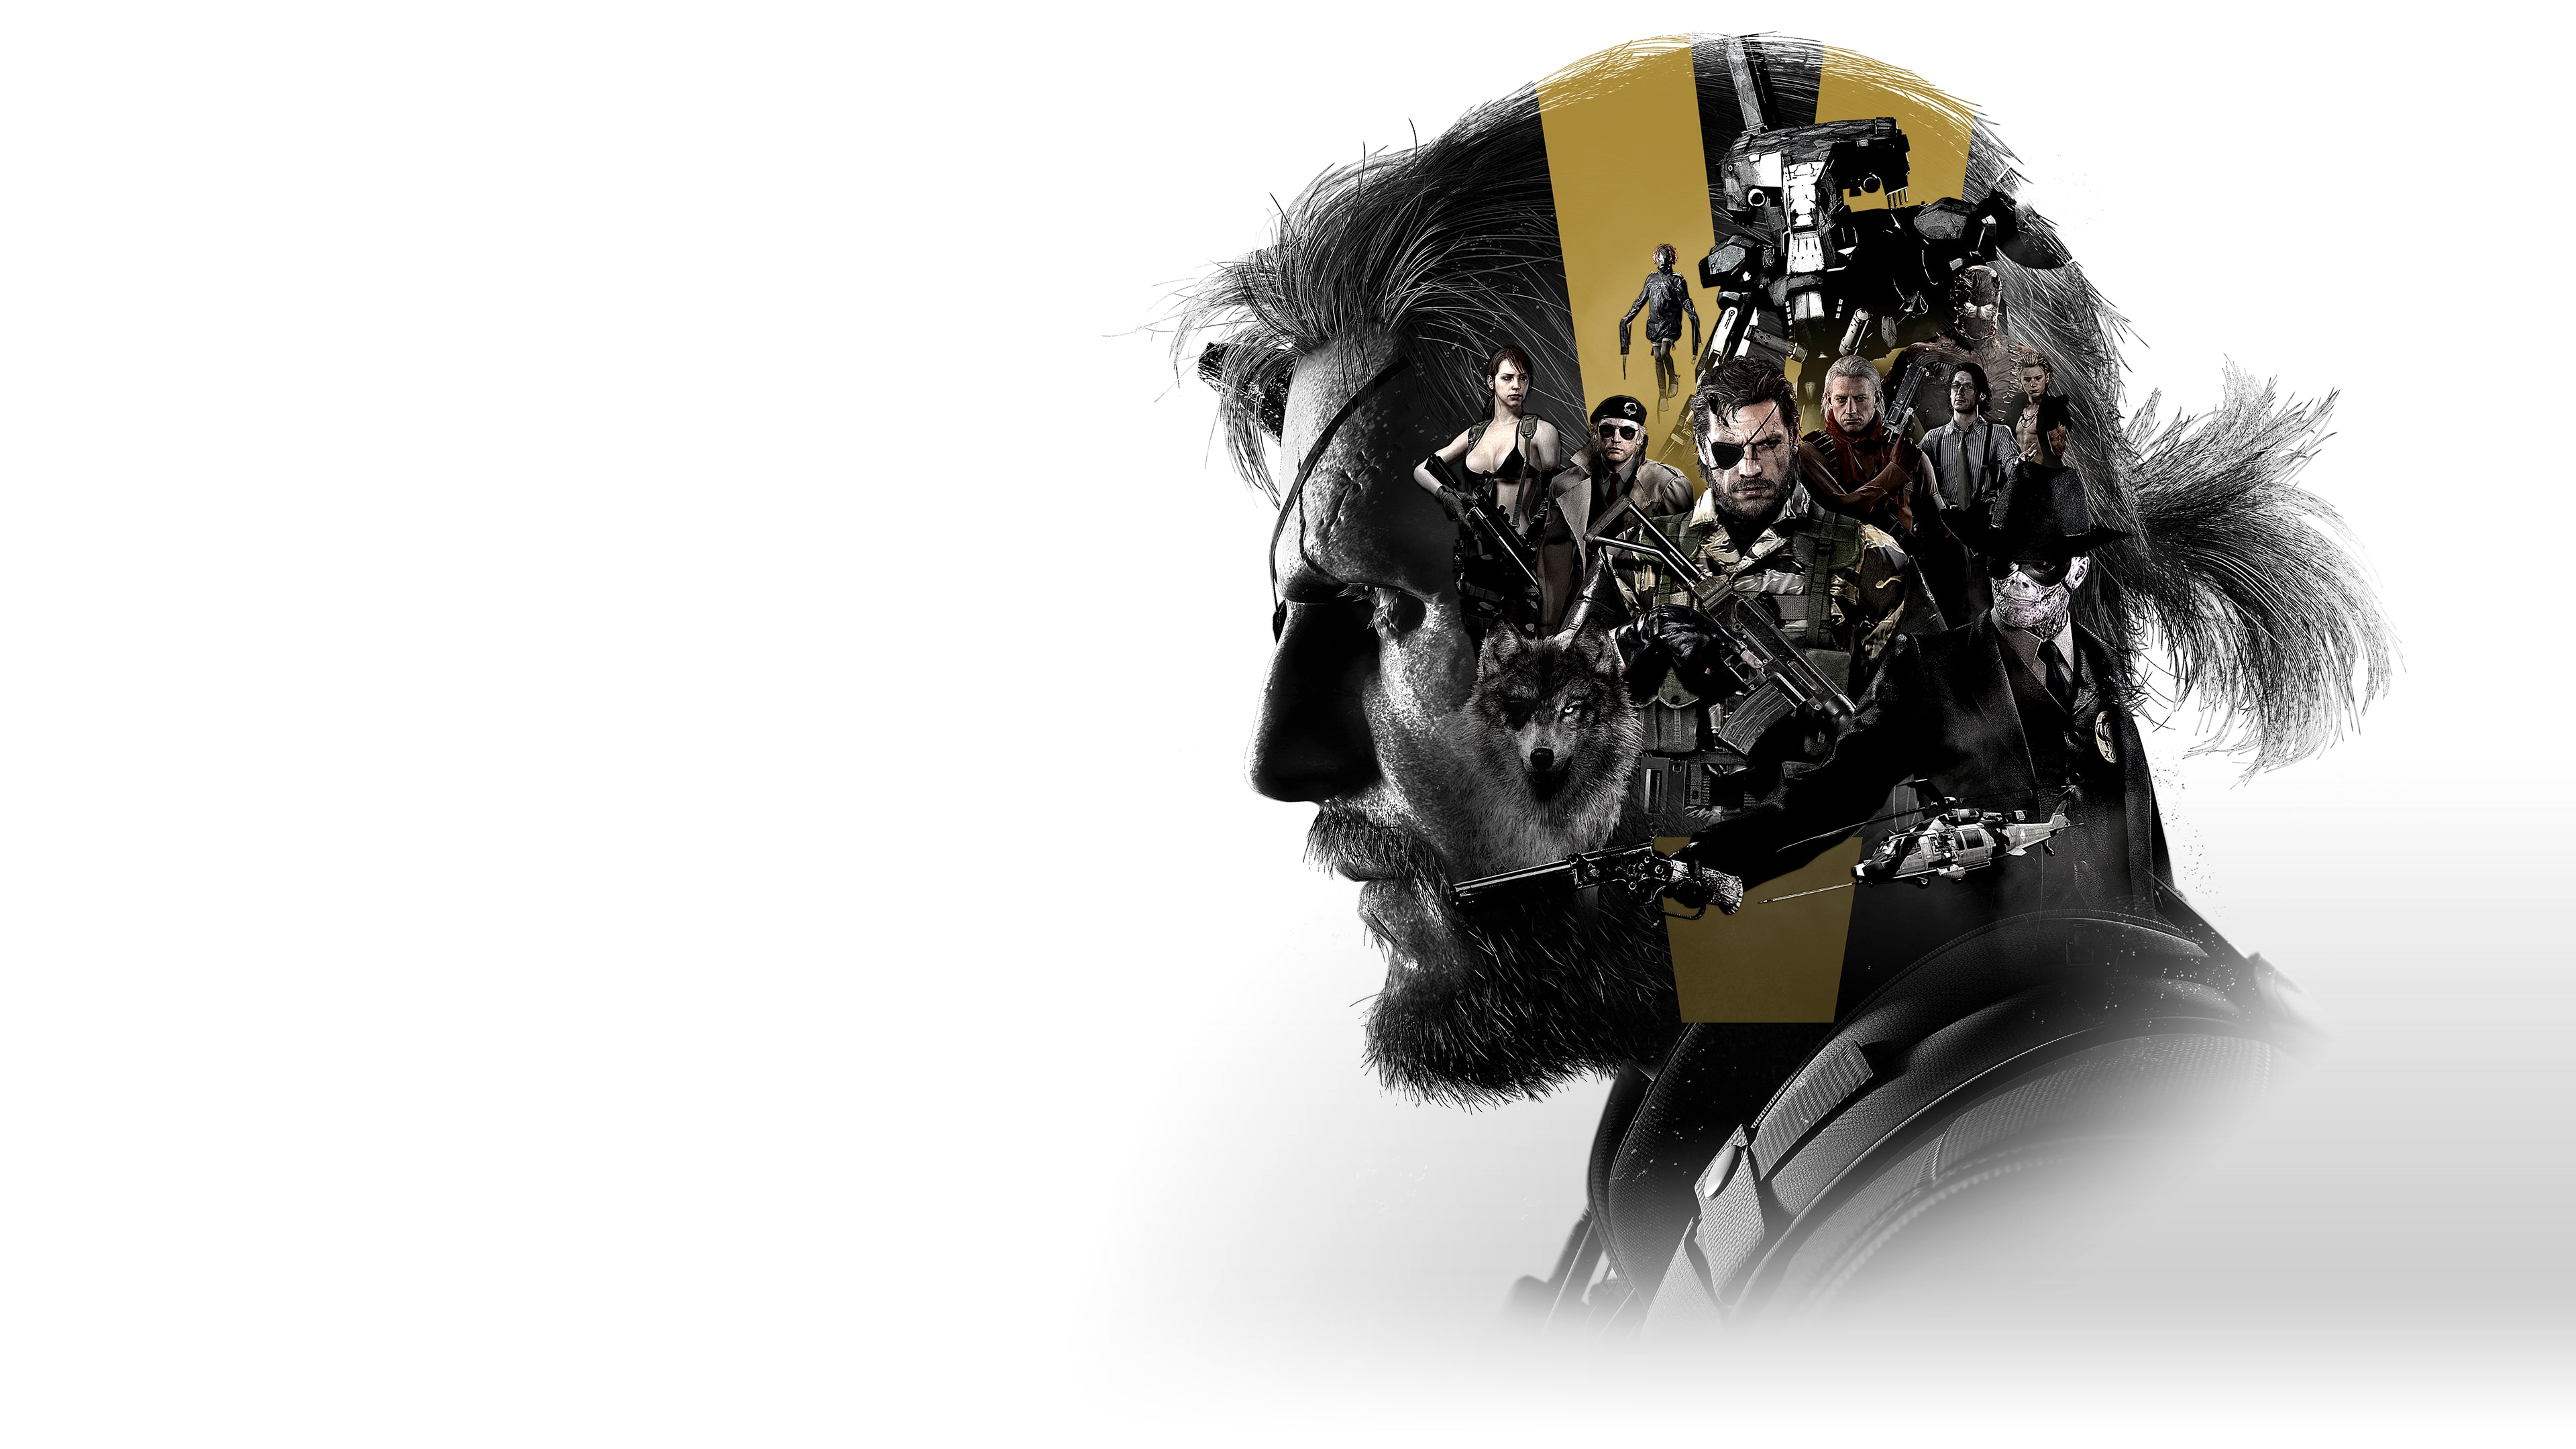 METAL GEAR SOLID V: THE DEFINITIVE EXPERIENCE PlayStation®Hits (English, Korean, Japanese, Traditional Chinese)